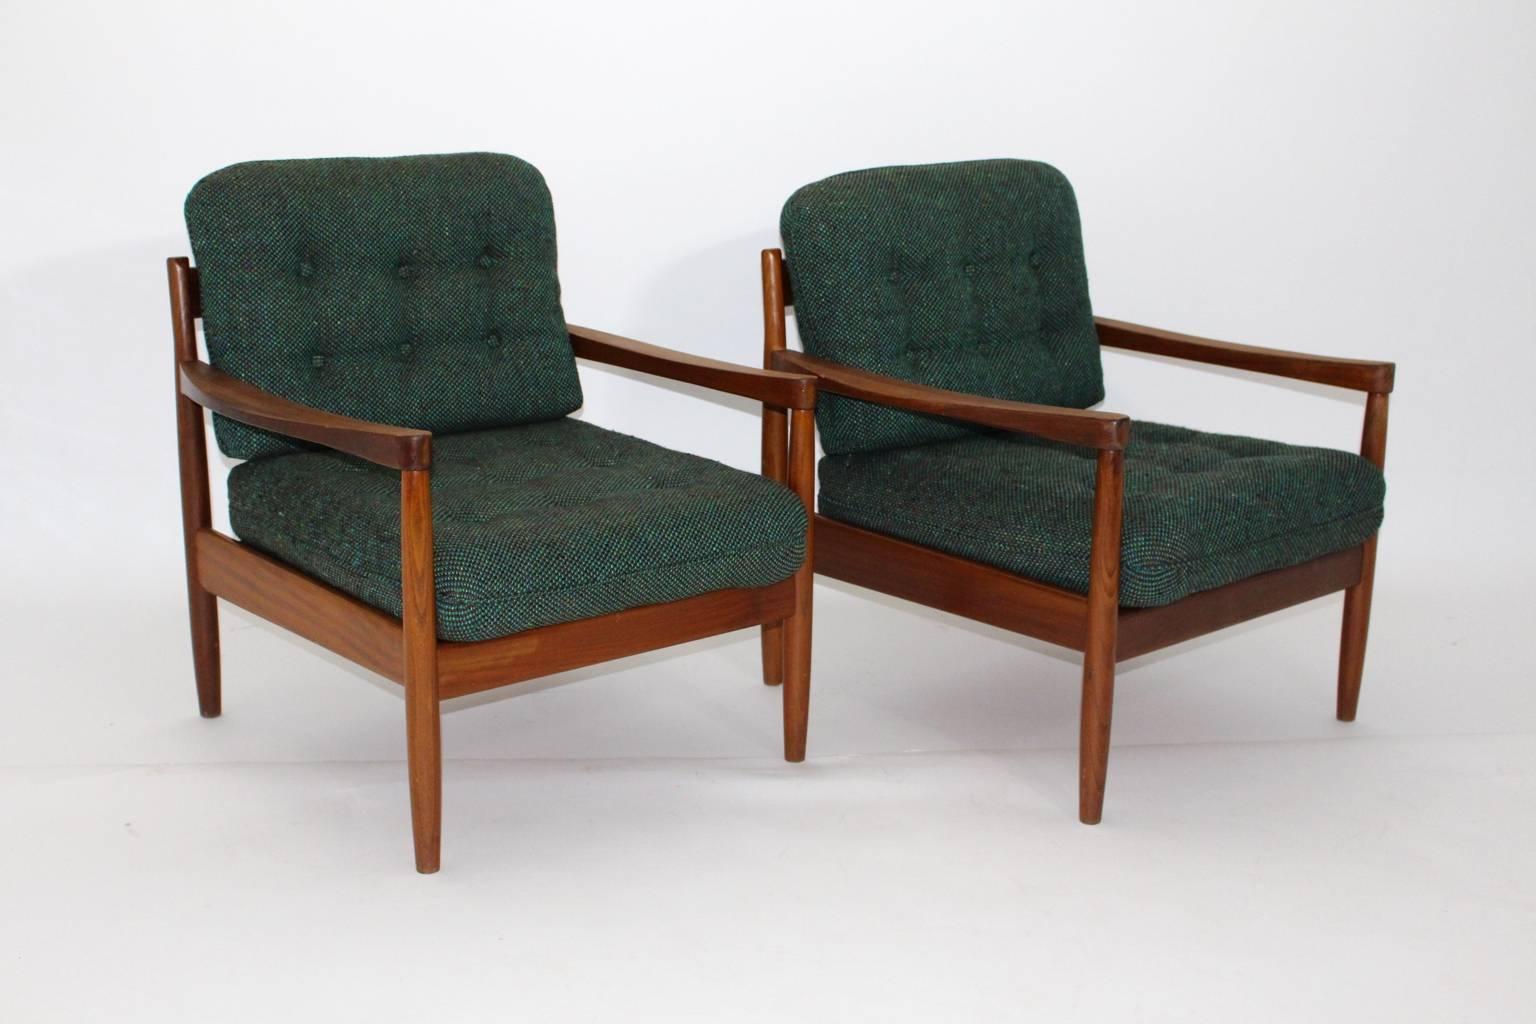 Beautiful sitting room set designed by Grete Jalk, circa 1955, consist of two armchairs and one coffee table, made of teakwood. The cushions are covered with the original textile woolen fabric, which shows a wonderful green-blue color.
Carefully